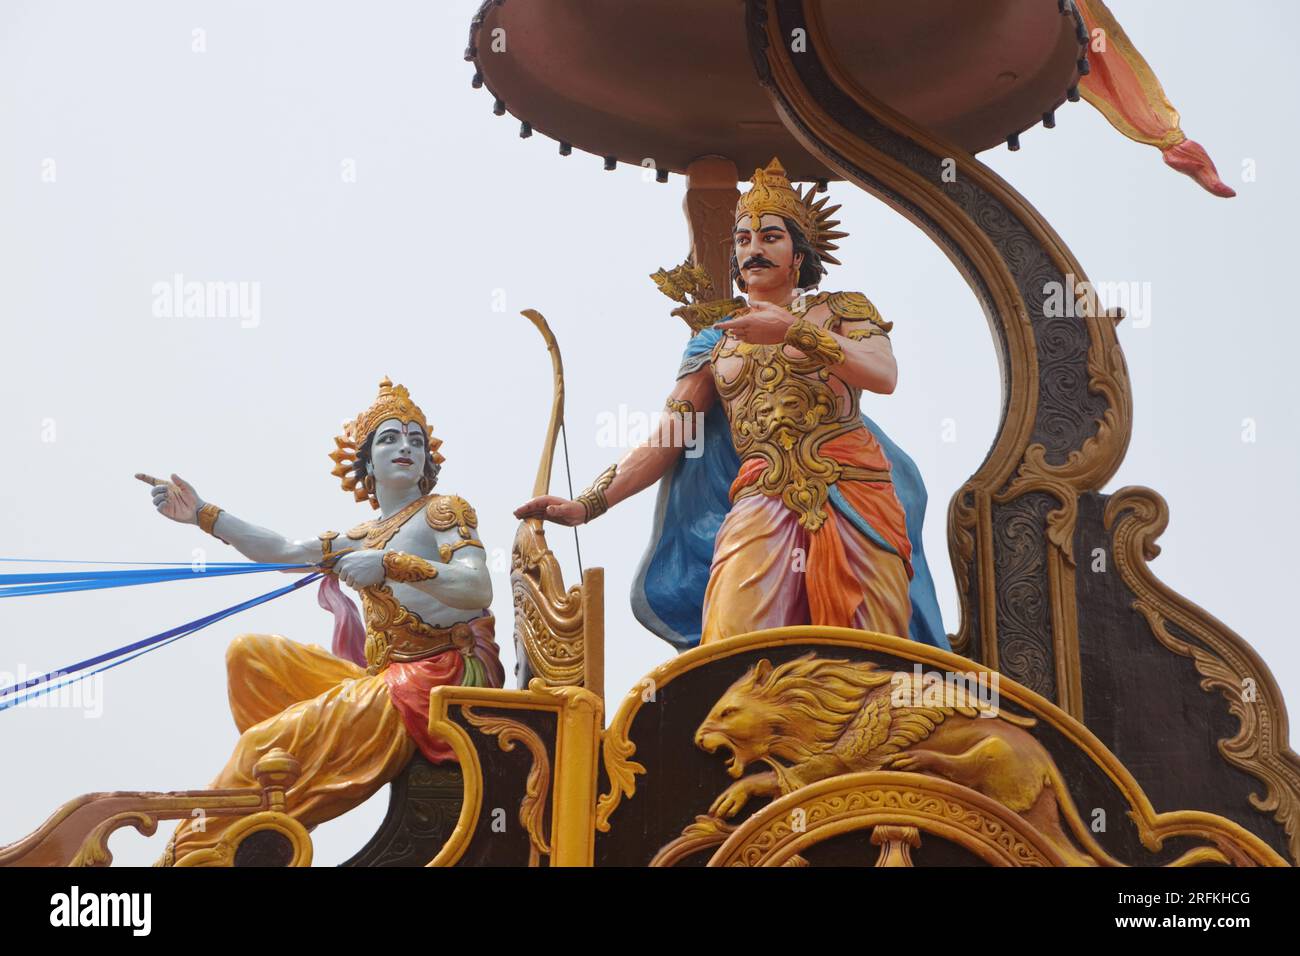 A beautifully colored sculpture showing Shri Krishna as a charioteer preaching to Arjuna during the Mahabharata war. Different angles and focus. Stock Photo